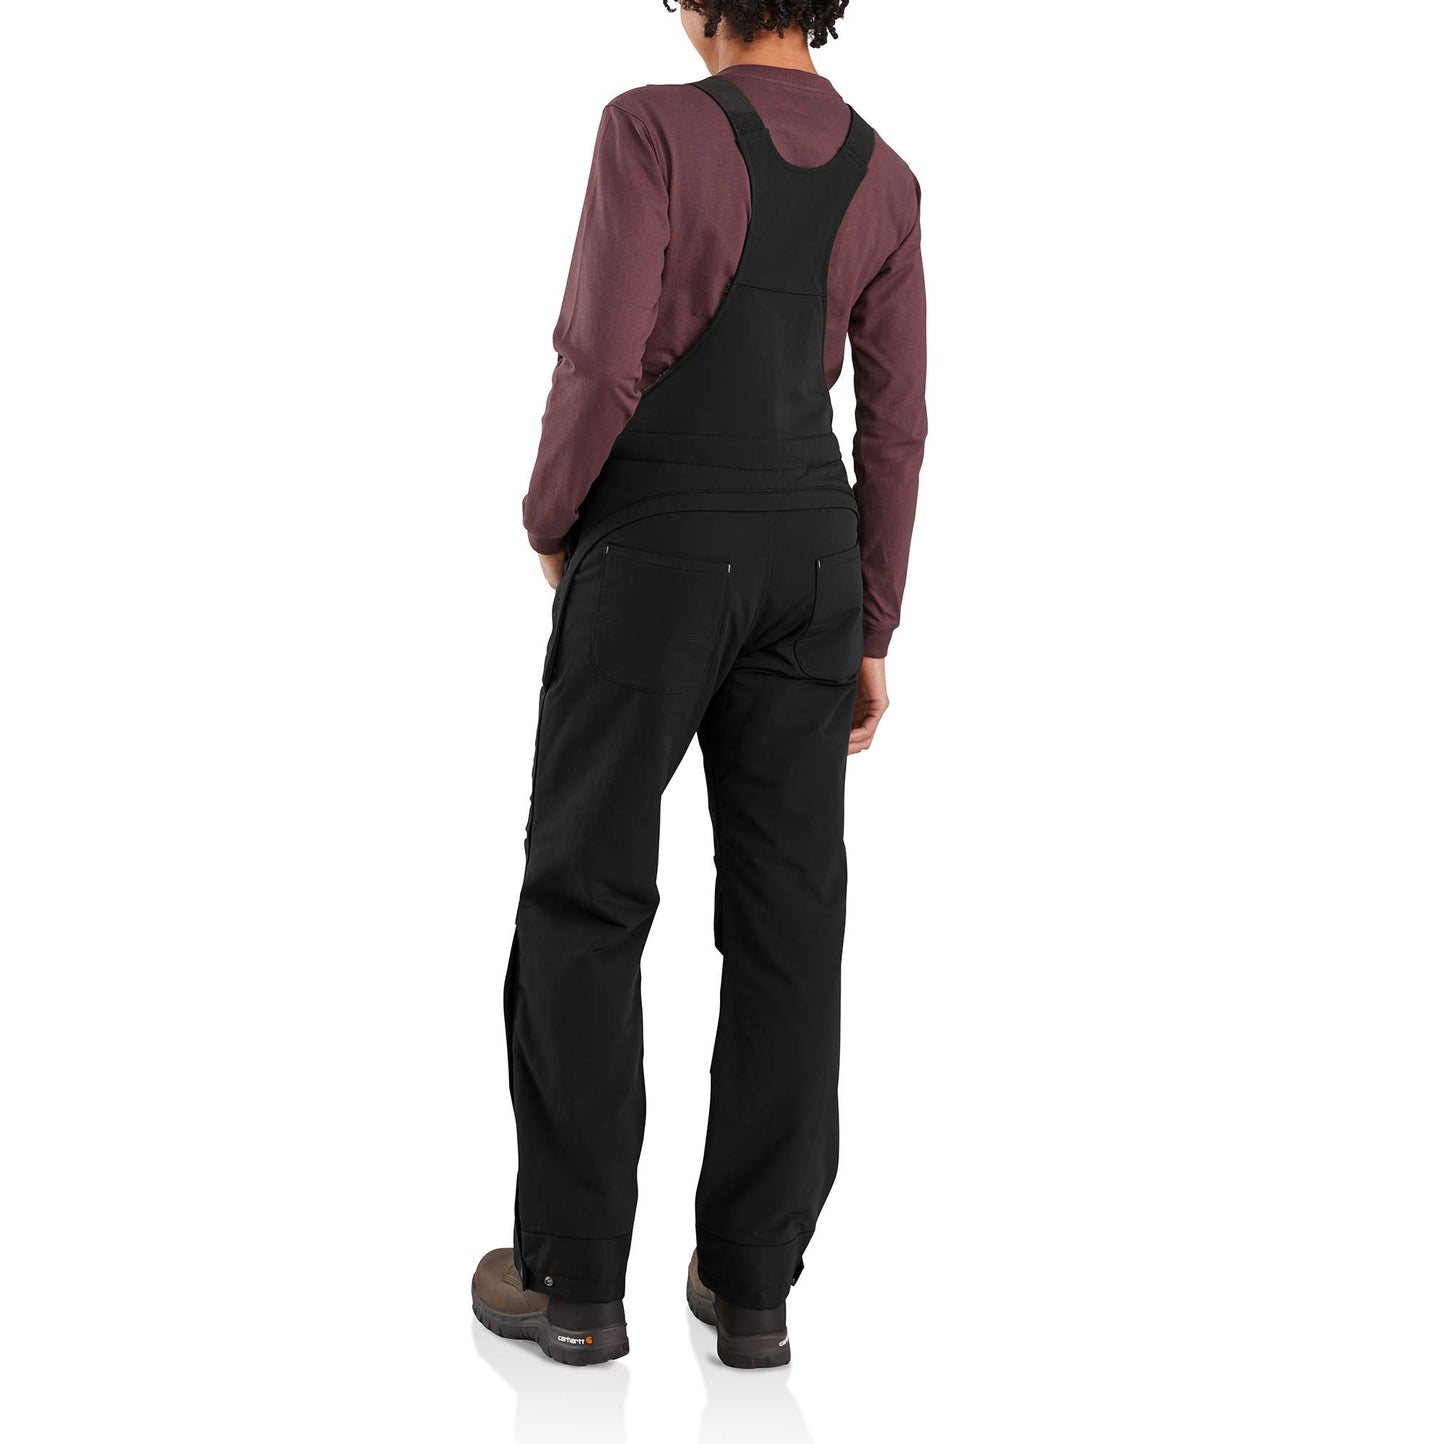 Women's Super Dux™Relaxed Fit Insulated Bib Overall - 4 Extreme Warmth Rating